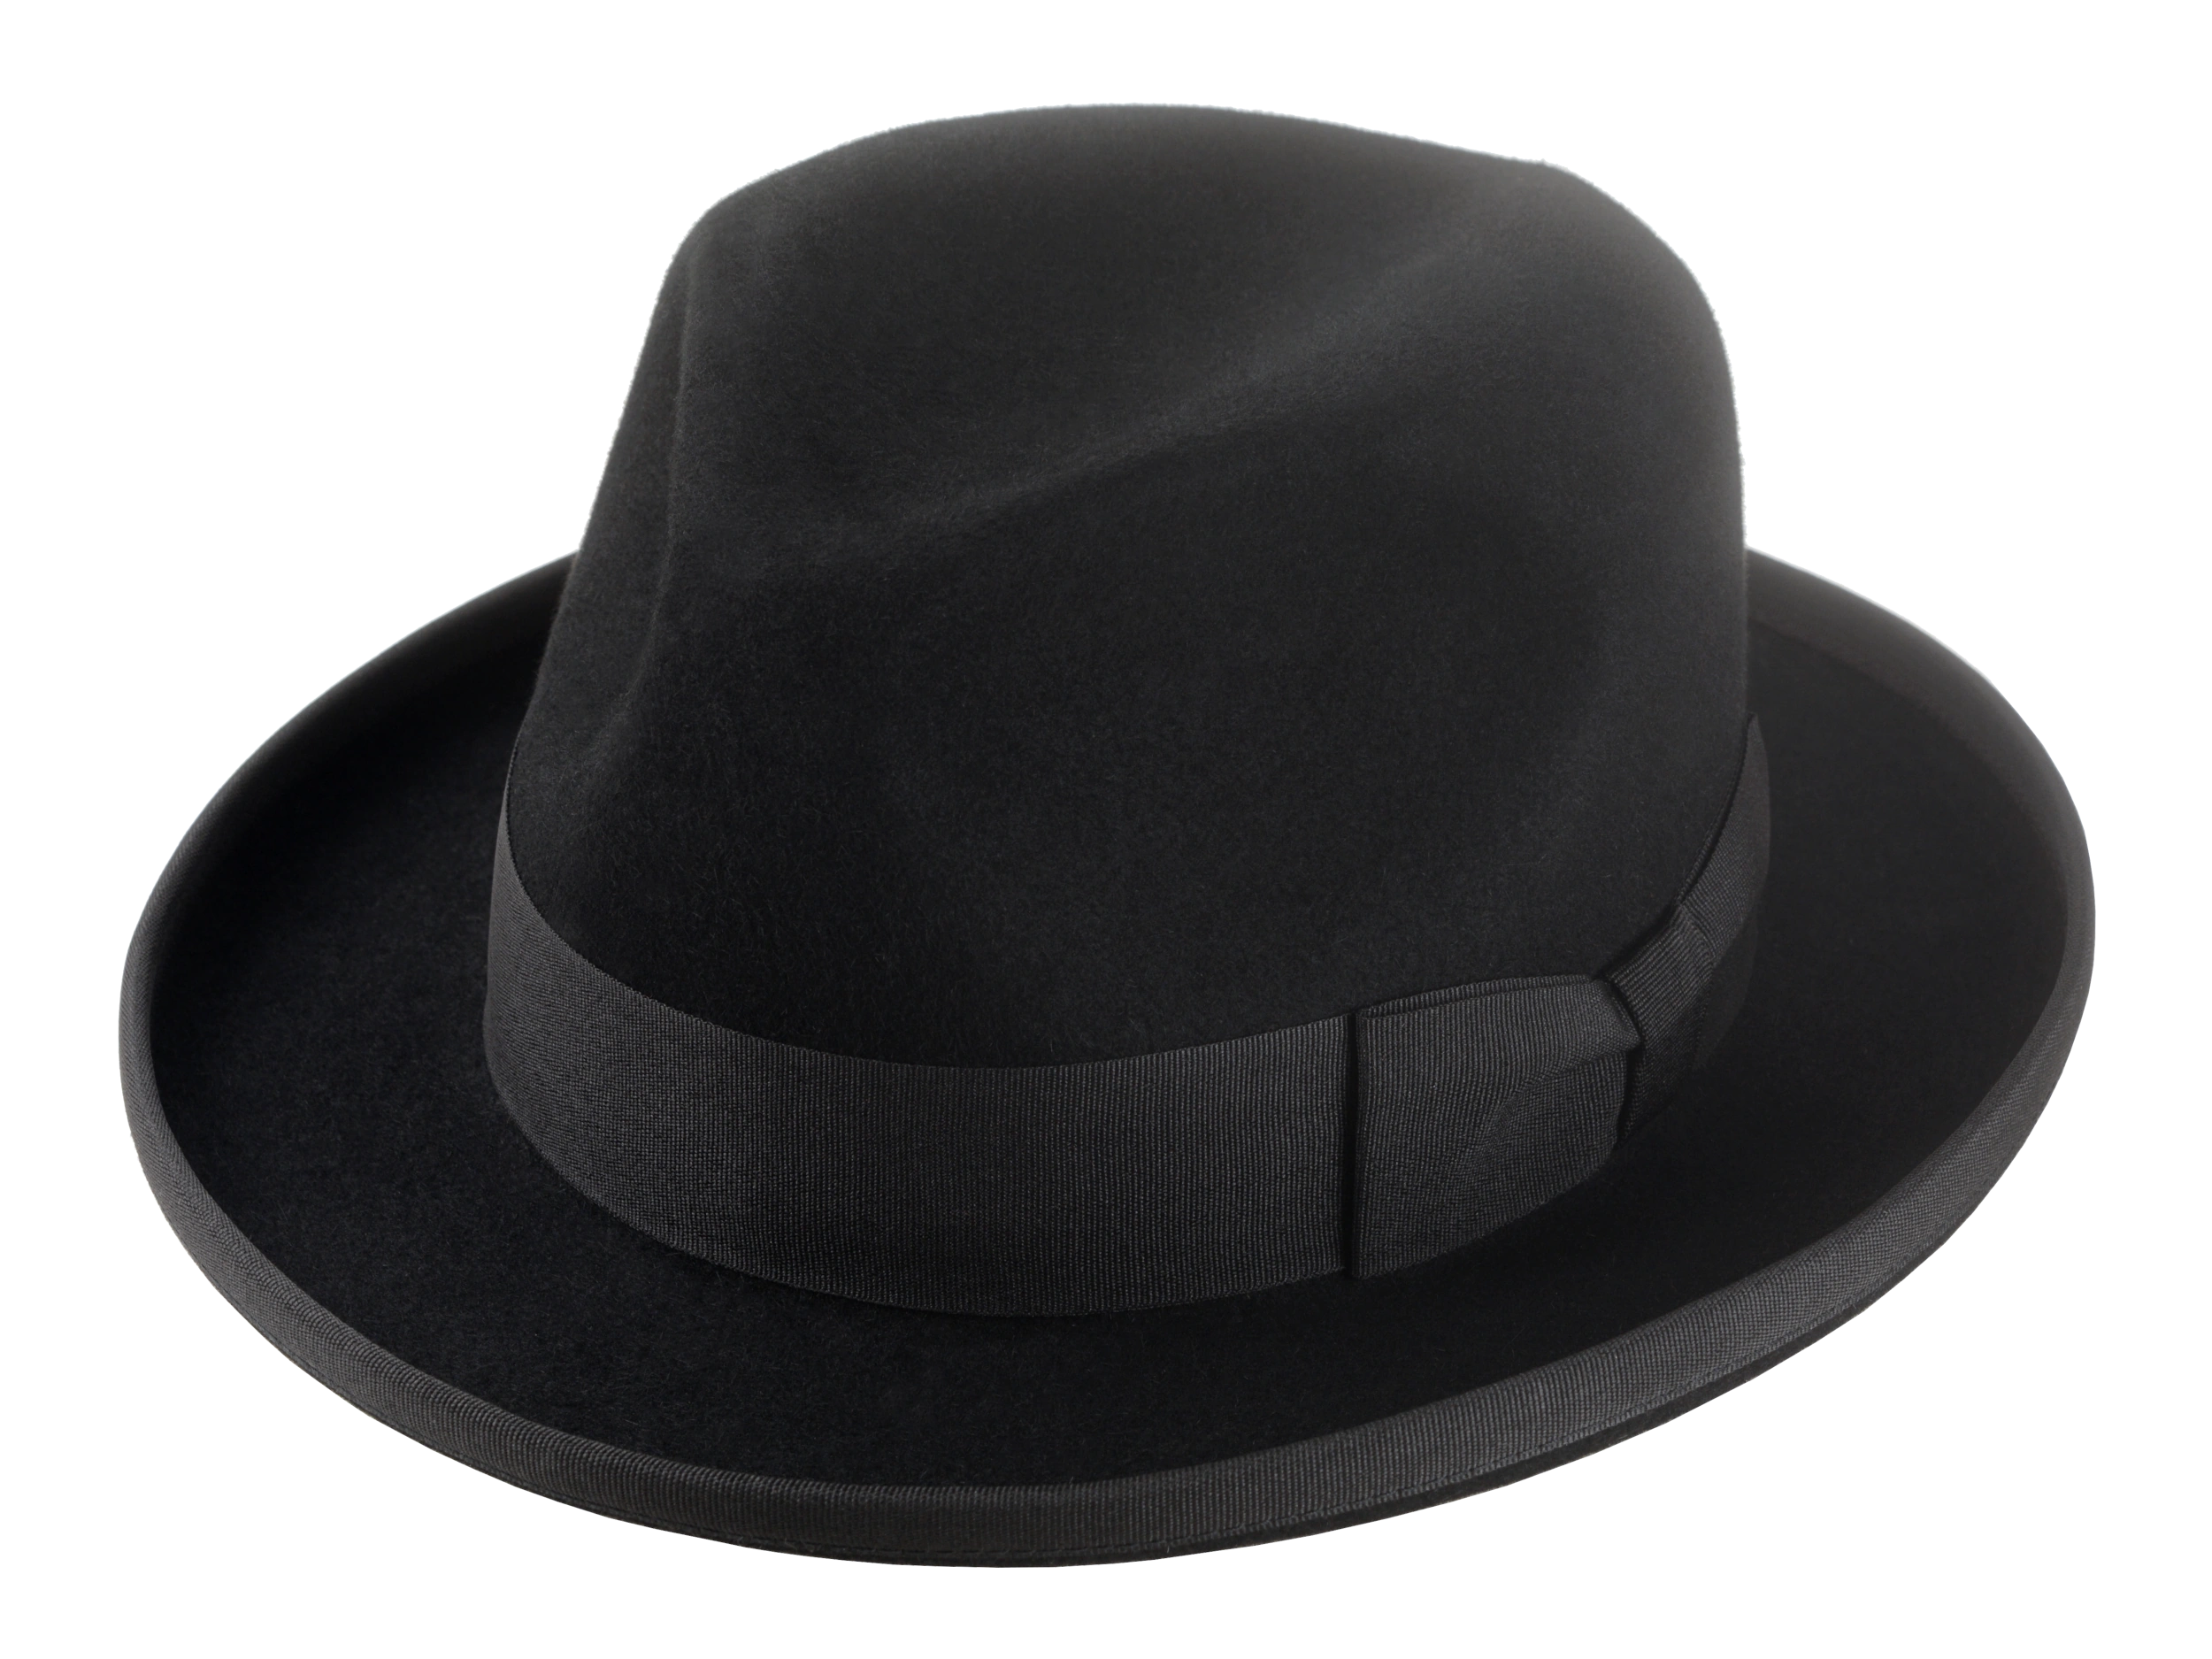 Black Homburg Hat known as Summit with a center-dent crown design on a white background